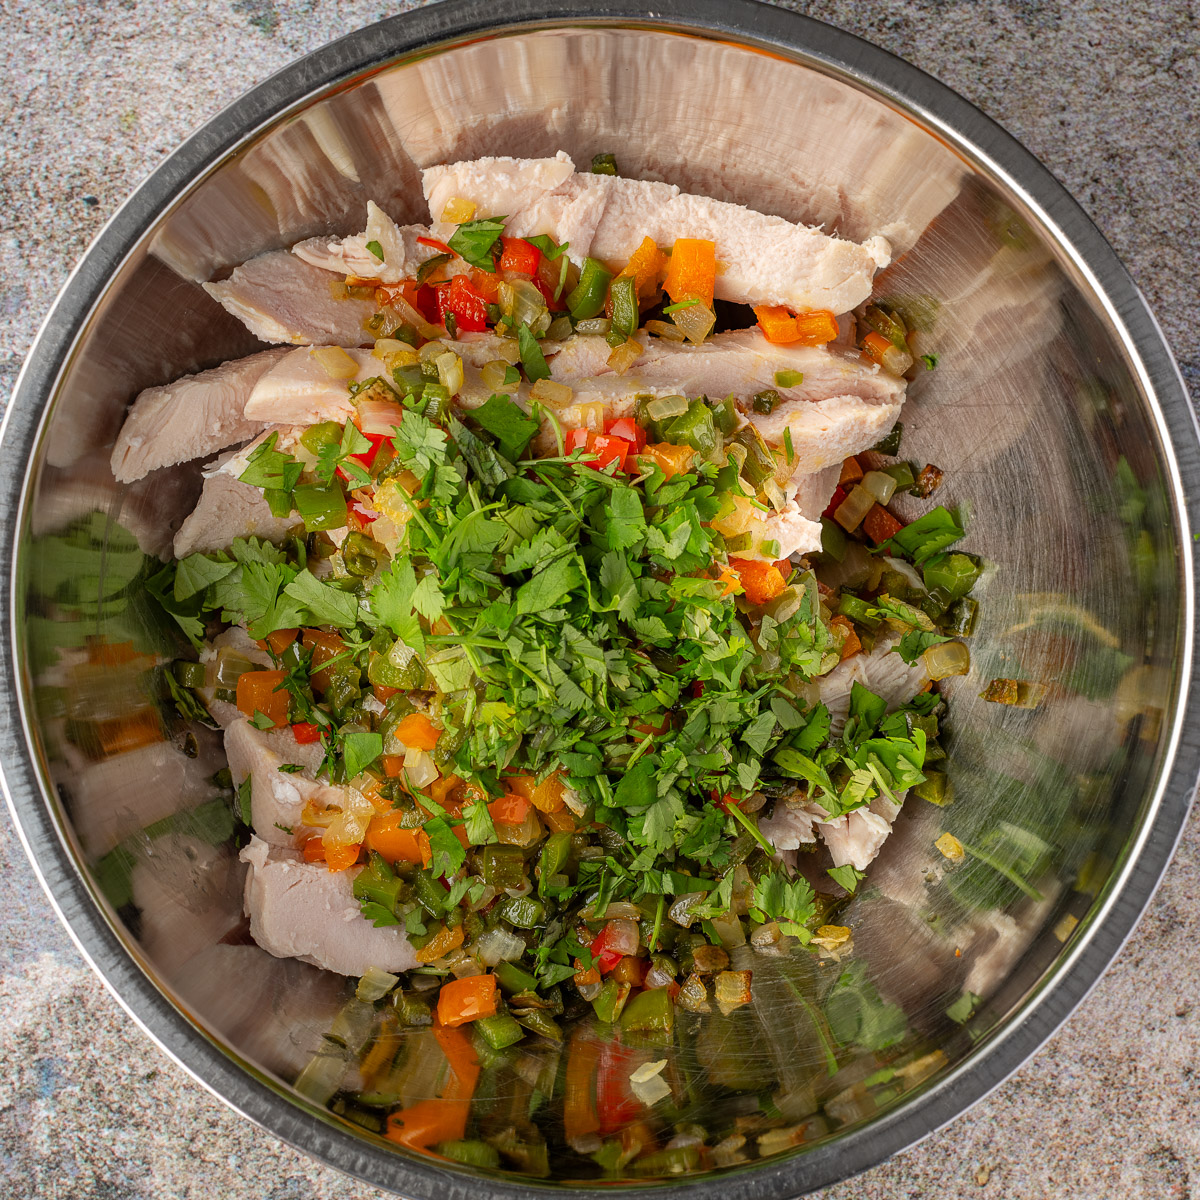 Mix chicken and vegetables in a large bowl. 